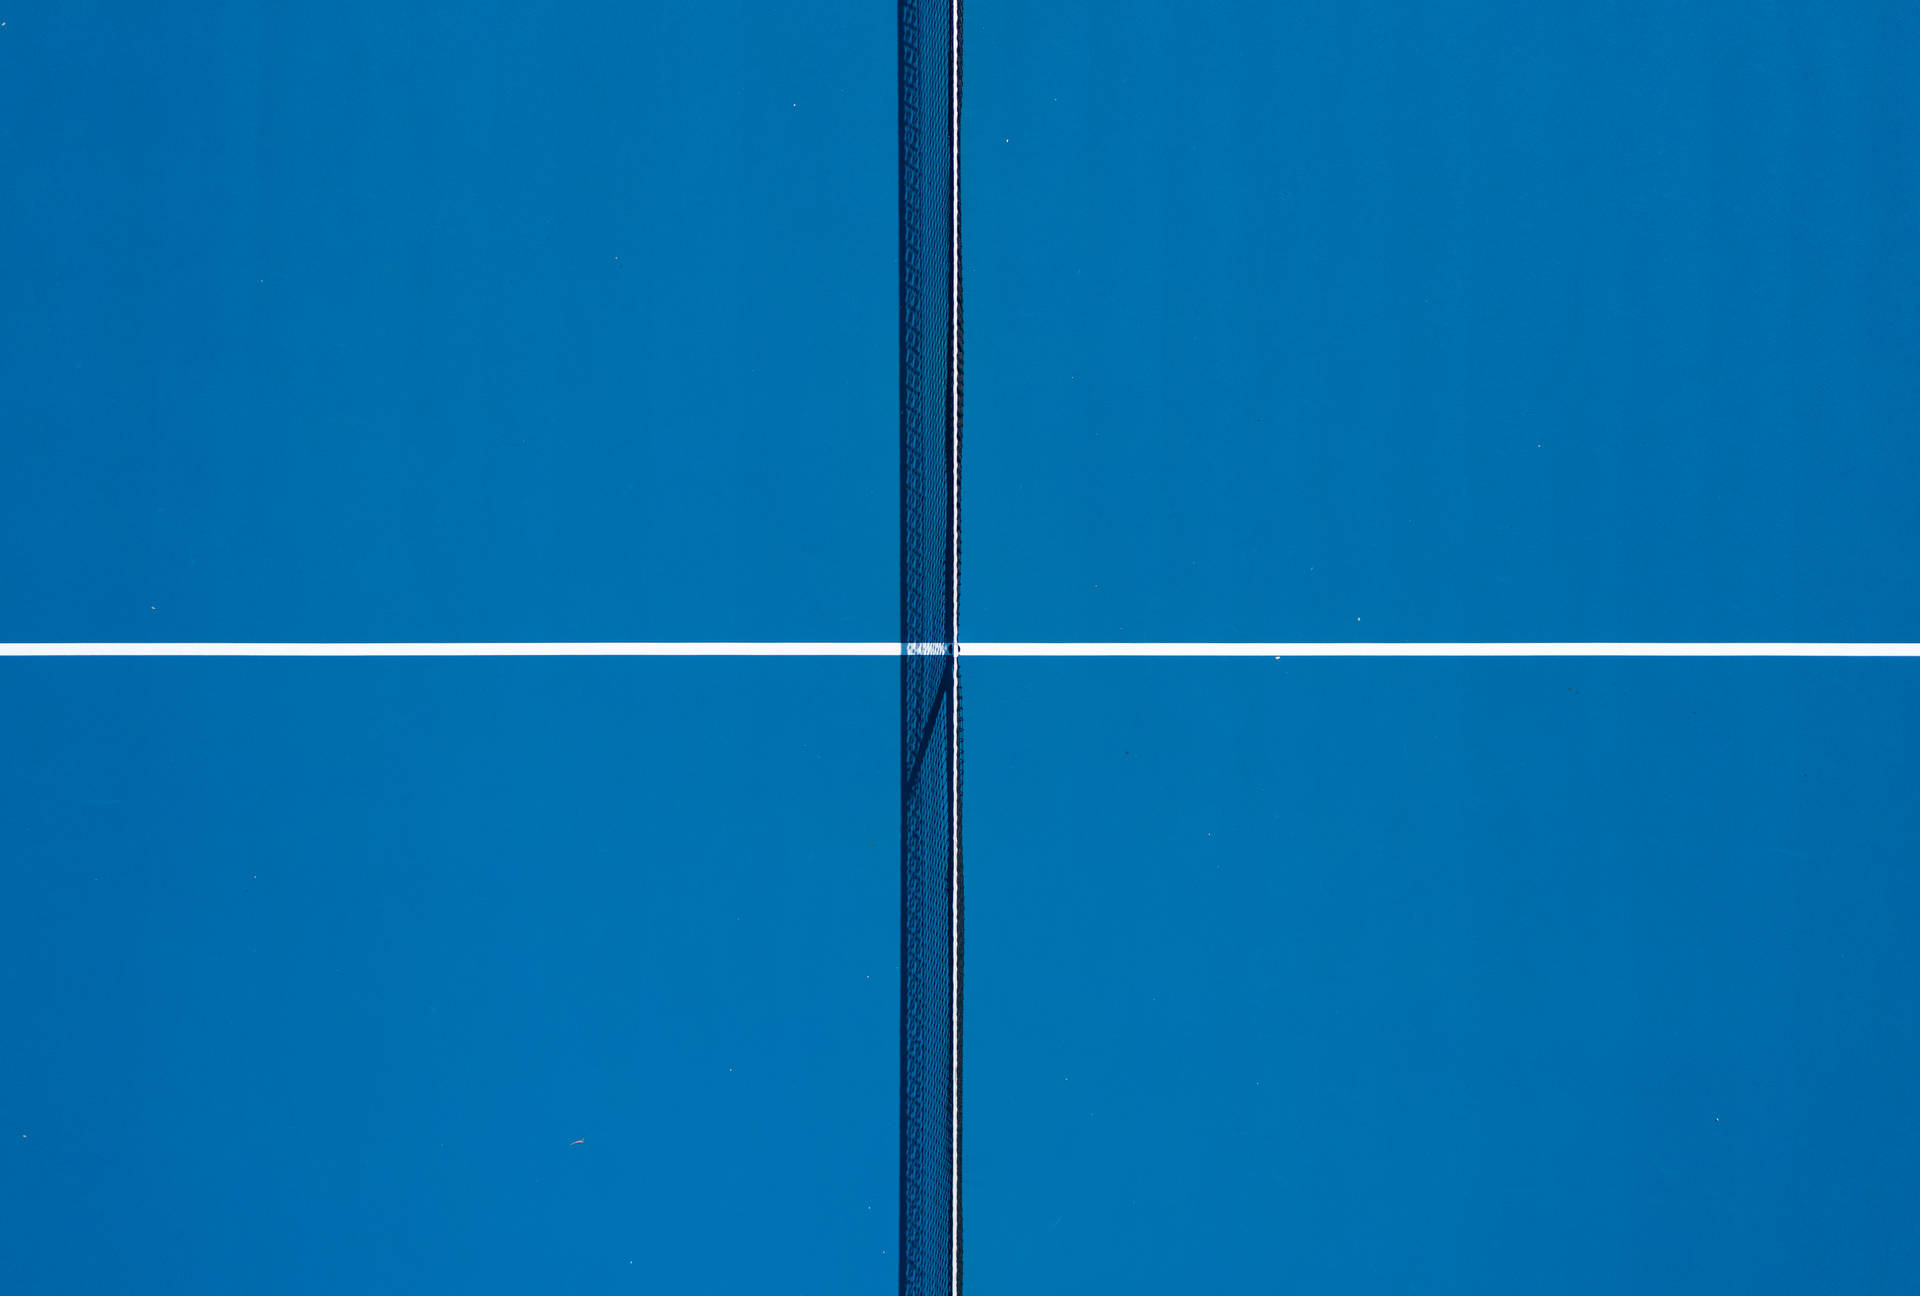 Tennis 5203X3513 Wallpaper and Background Image